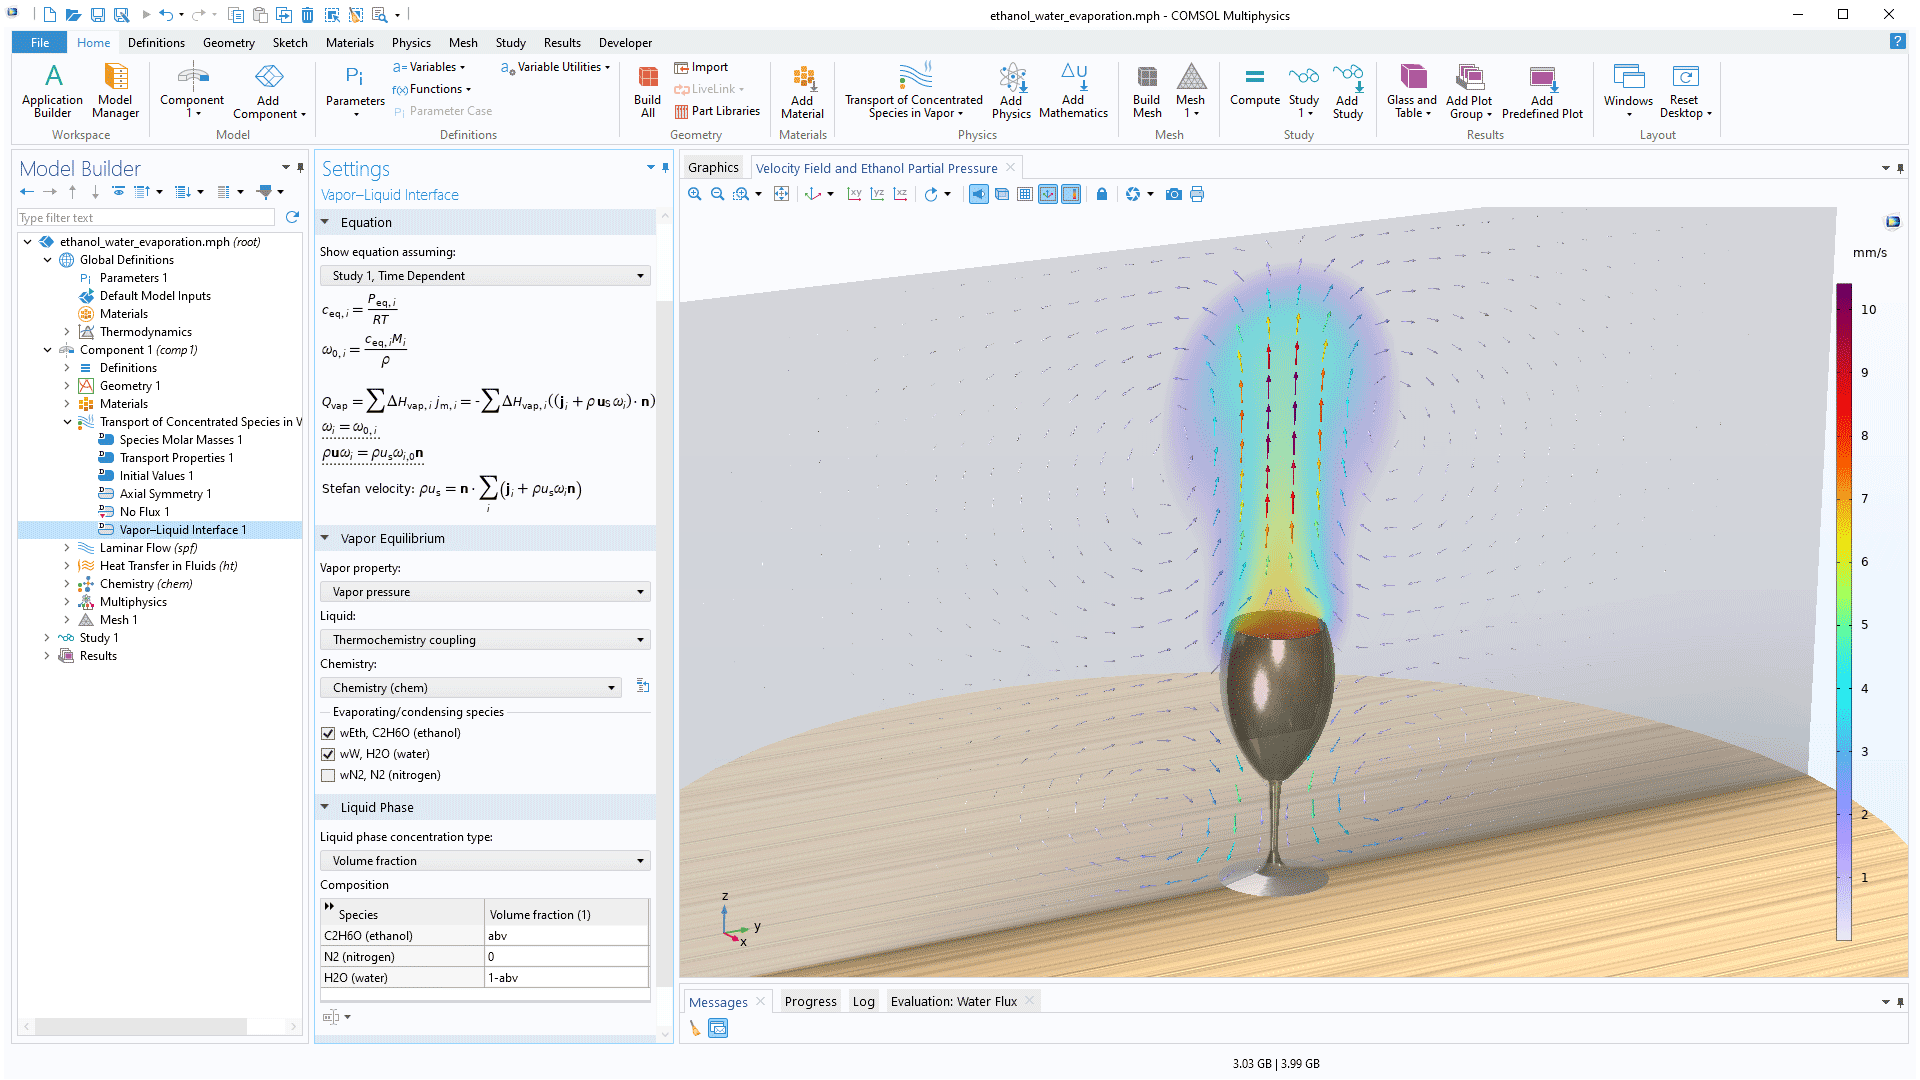 The COMSOL Multiphysics UI showing the Model Builder with the Vapor–Liquid Interface node highlighted, the corresponding Settings window, and an ethanol–water mixture model in the Graphics window.